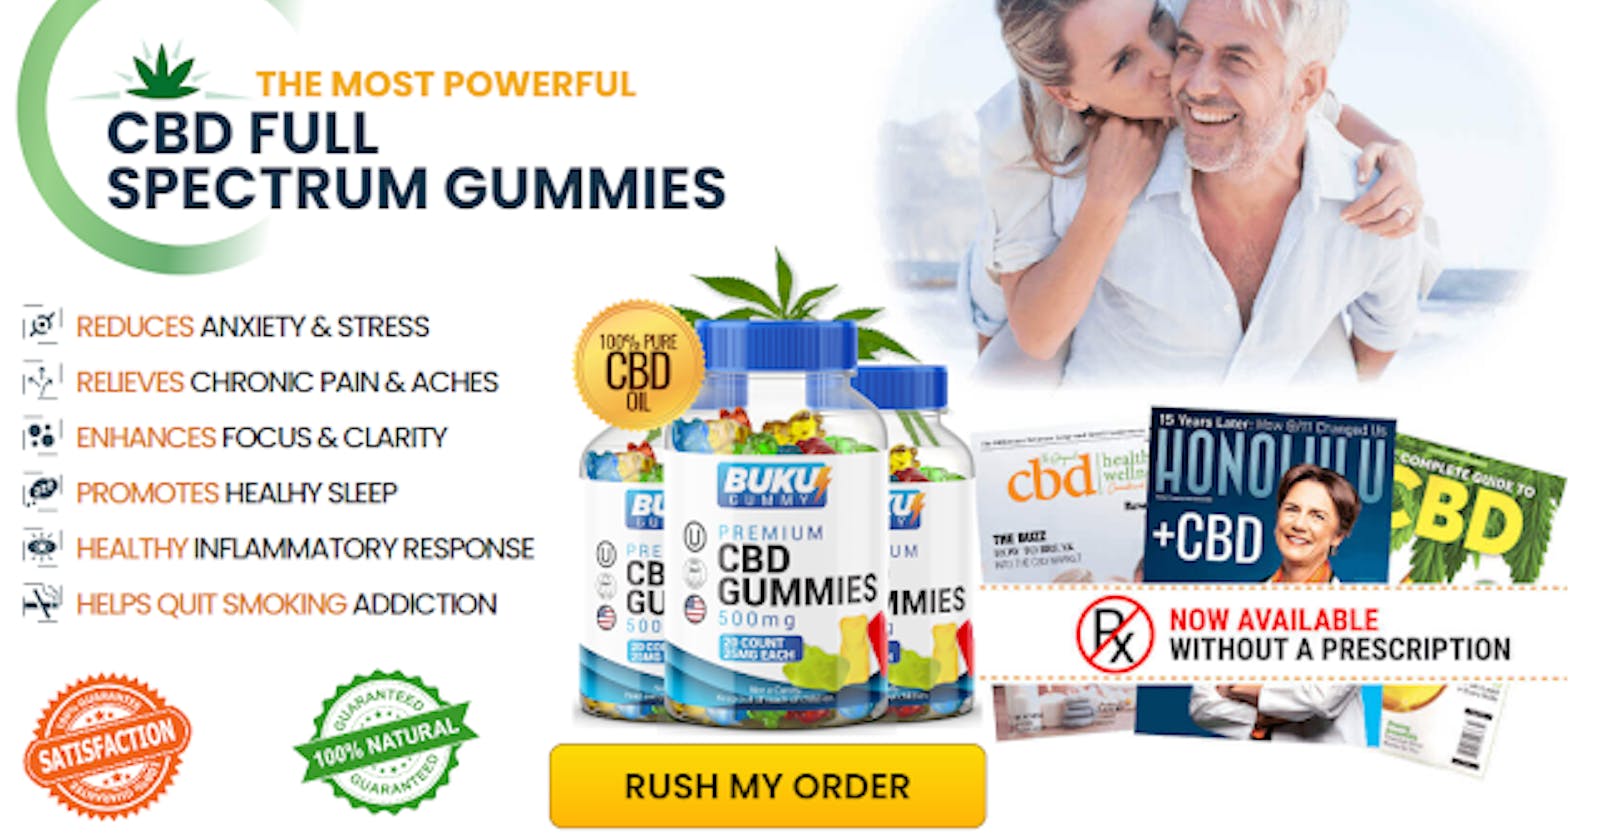 Buku CBD Gummies Reviews Pain Relief What are Main Ingredients OR Benefits!